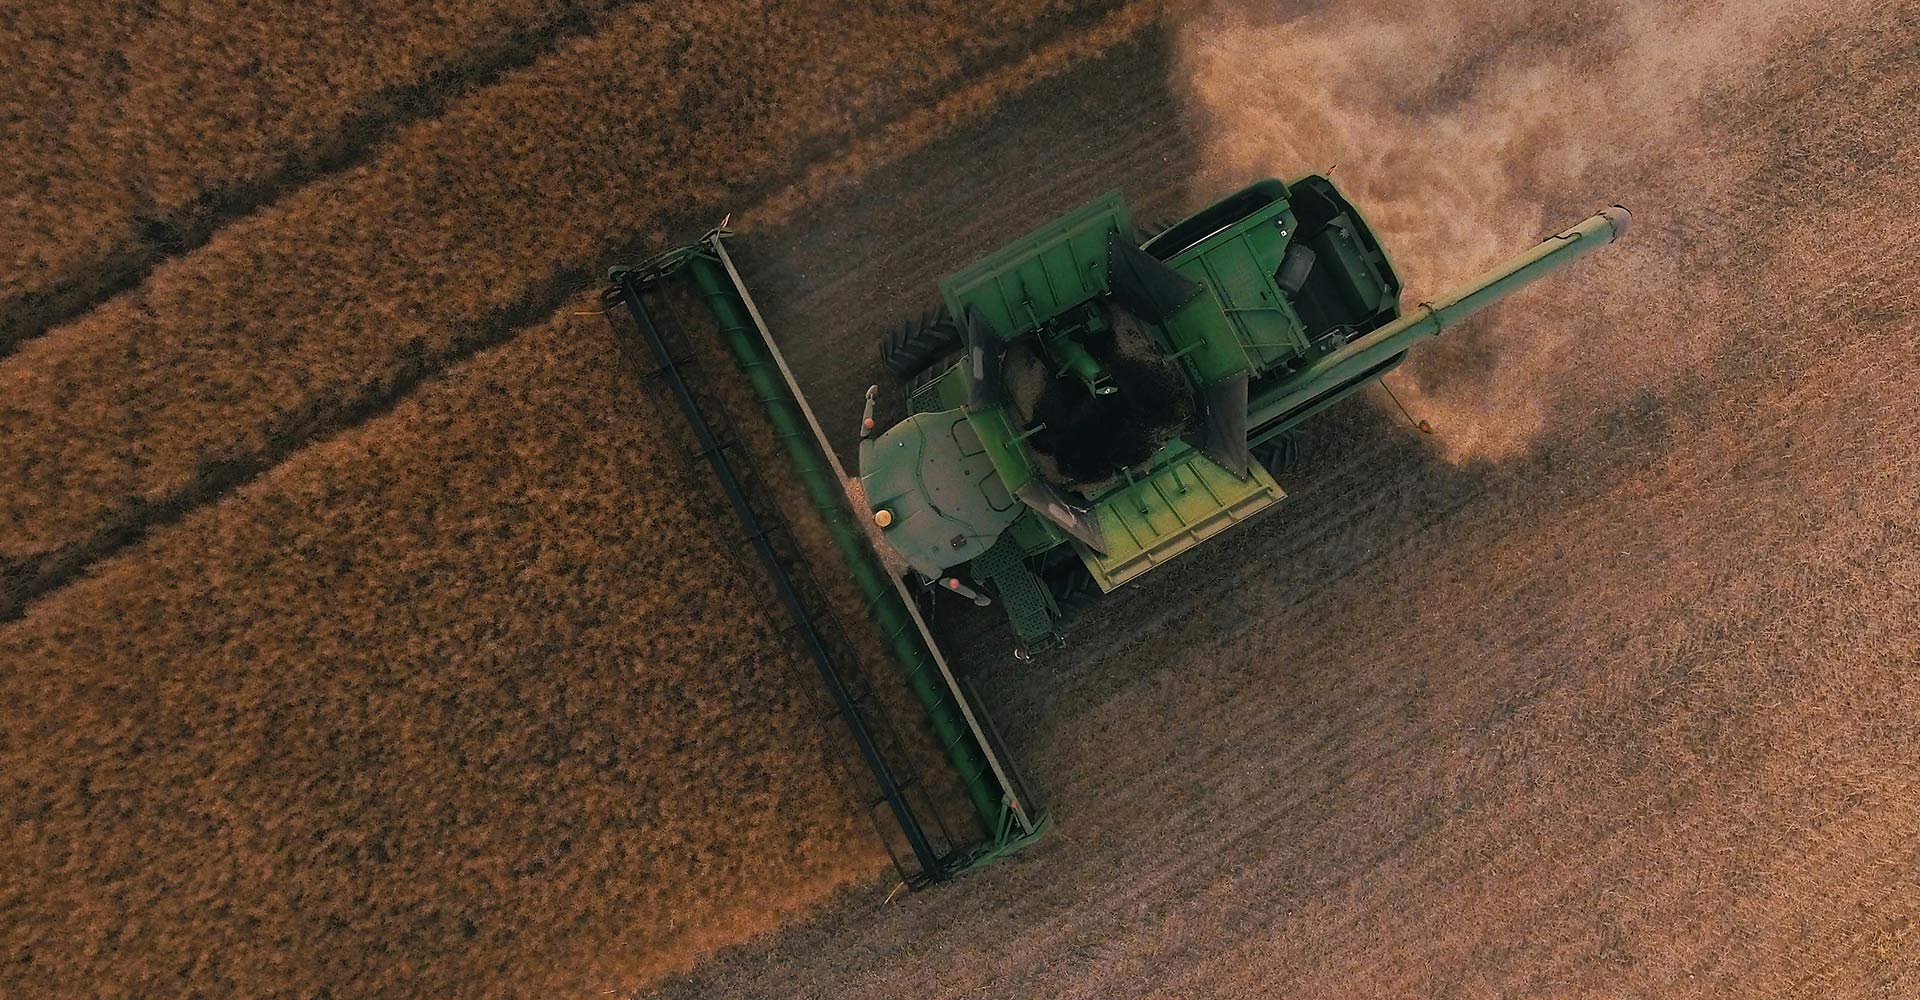 Aerial view of a green combine harvester cutting through a field of crops, producing dust behind it, creating distinct lines in the field.